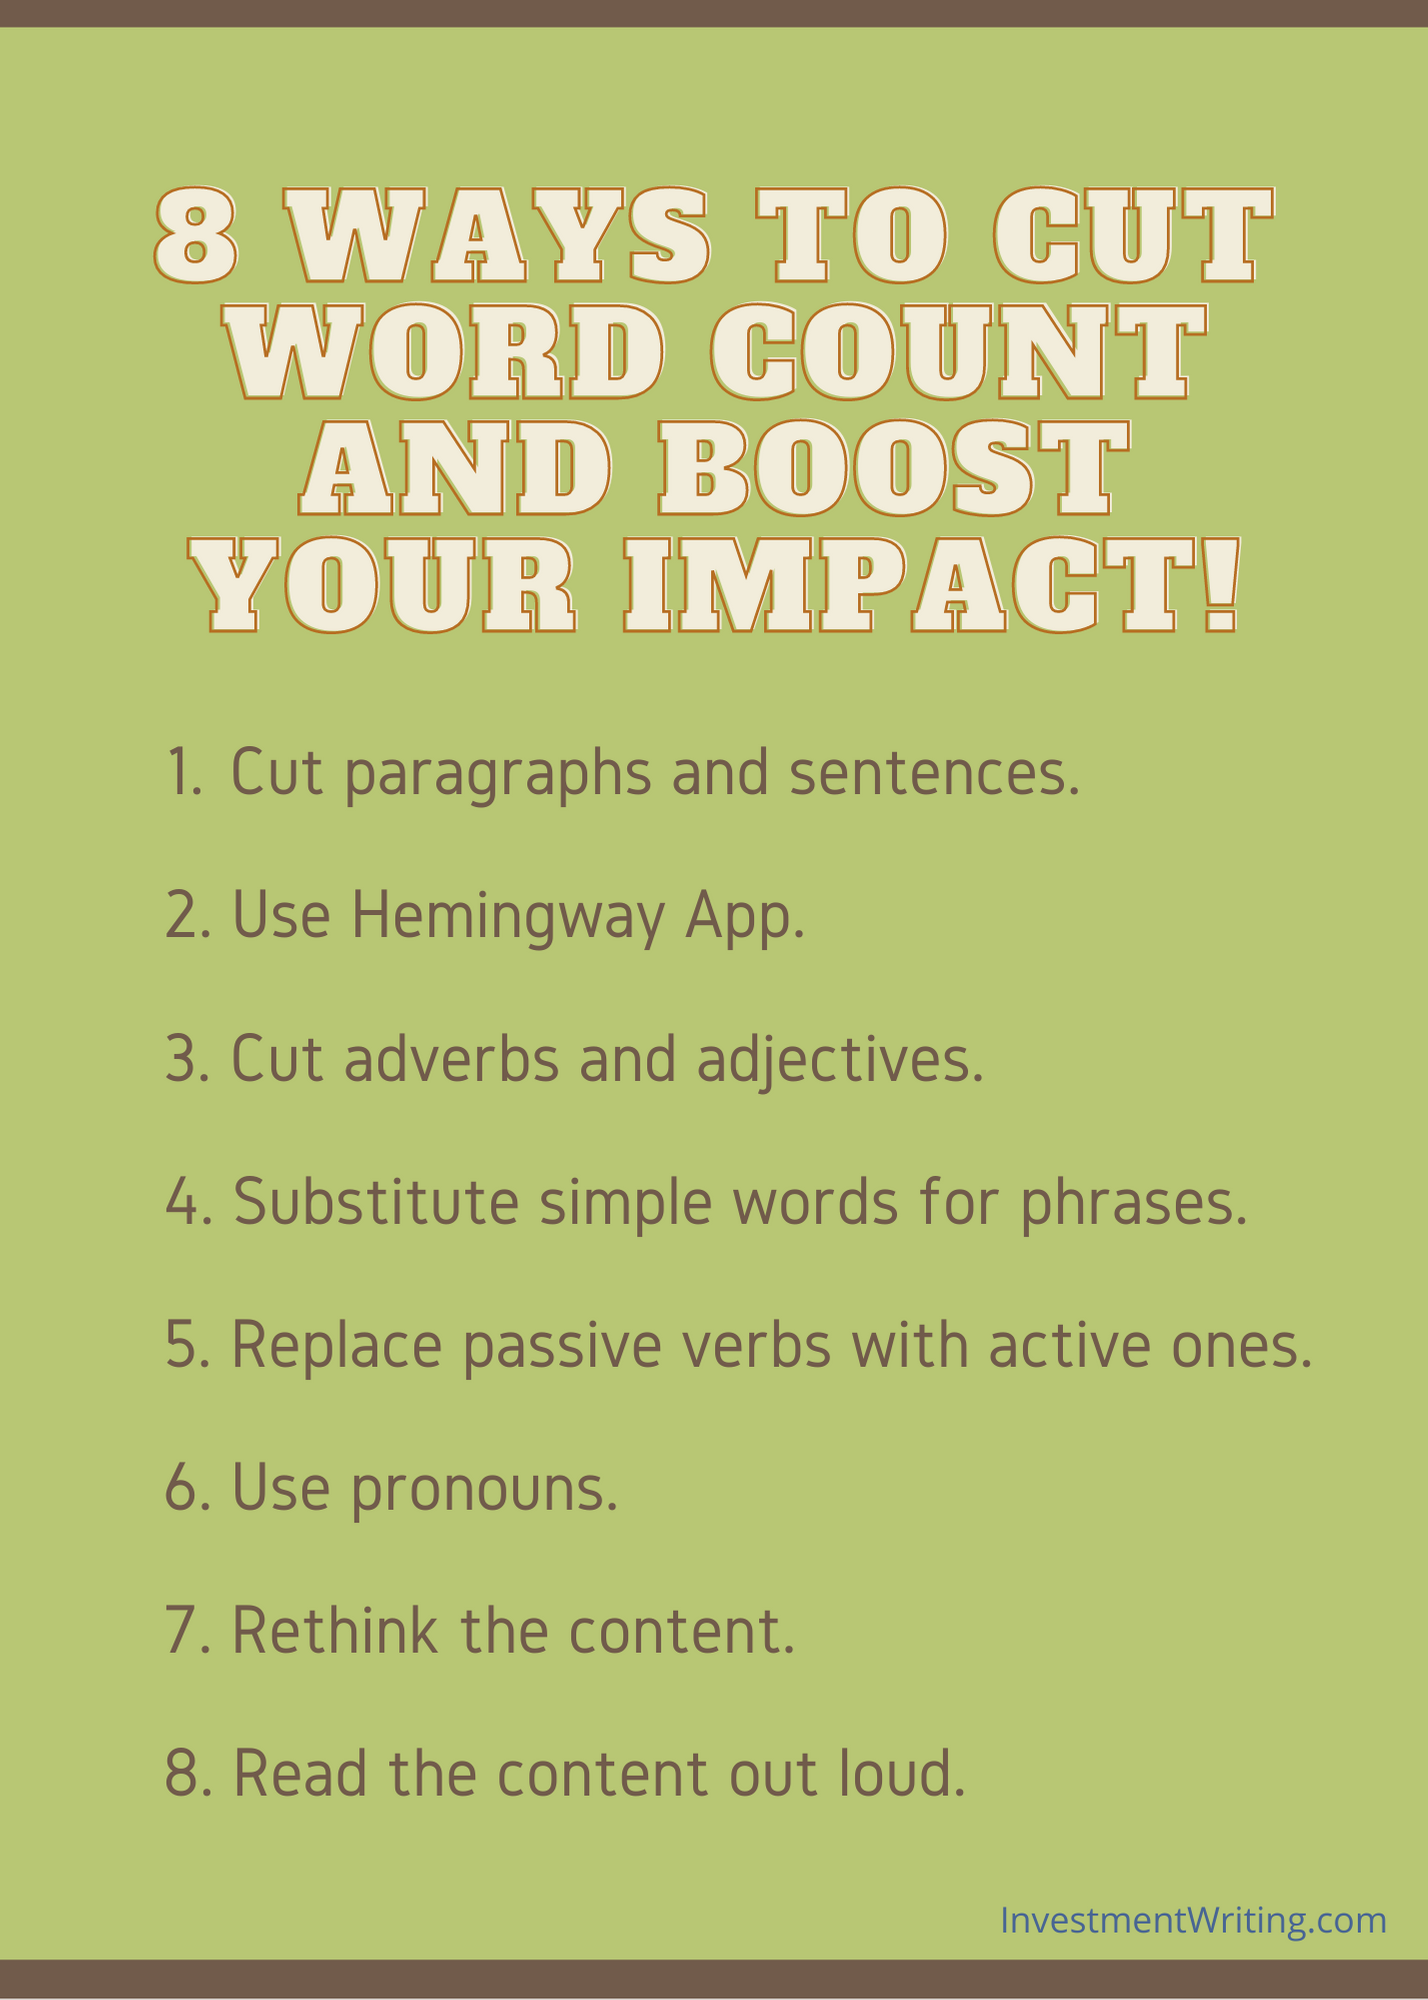 how to cut down words in essay